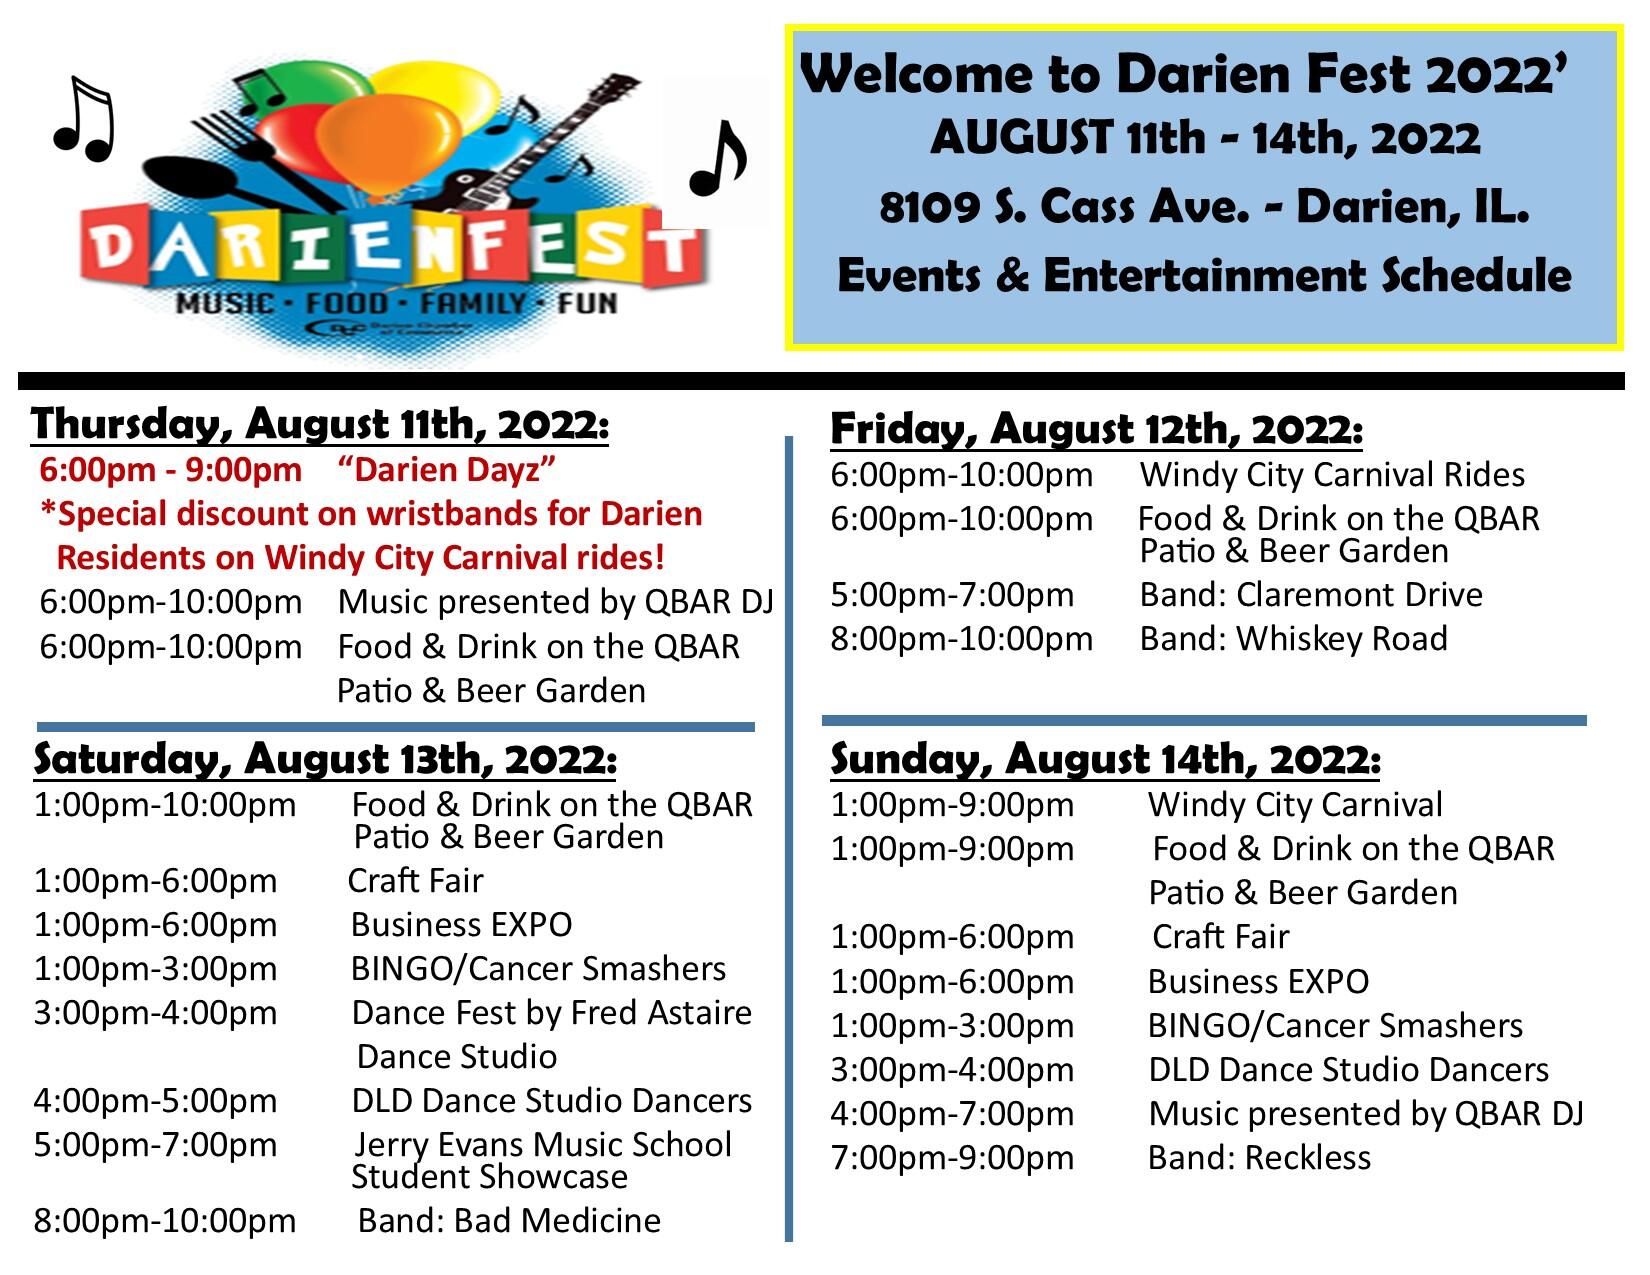 Make plans to come and celebrate Darien Fest 2022 with us starting